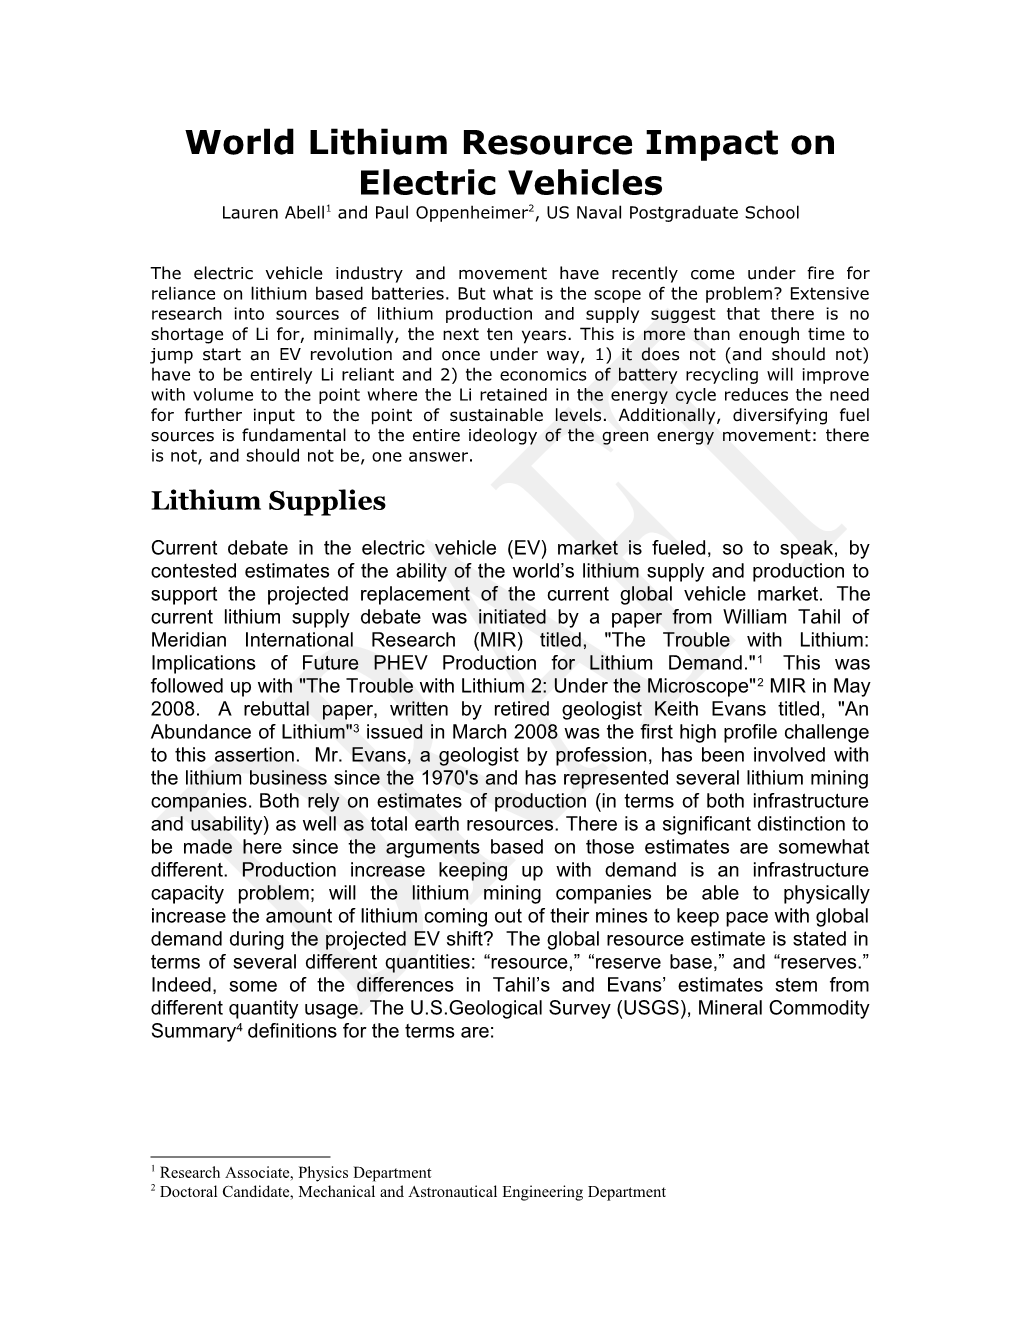 World Lithium Resource Impact on Electric Vehicles